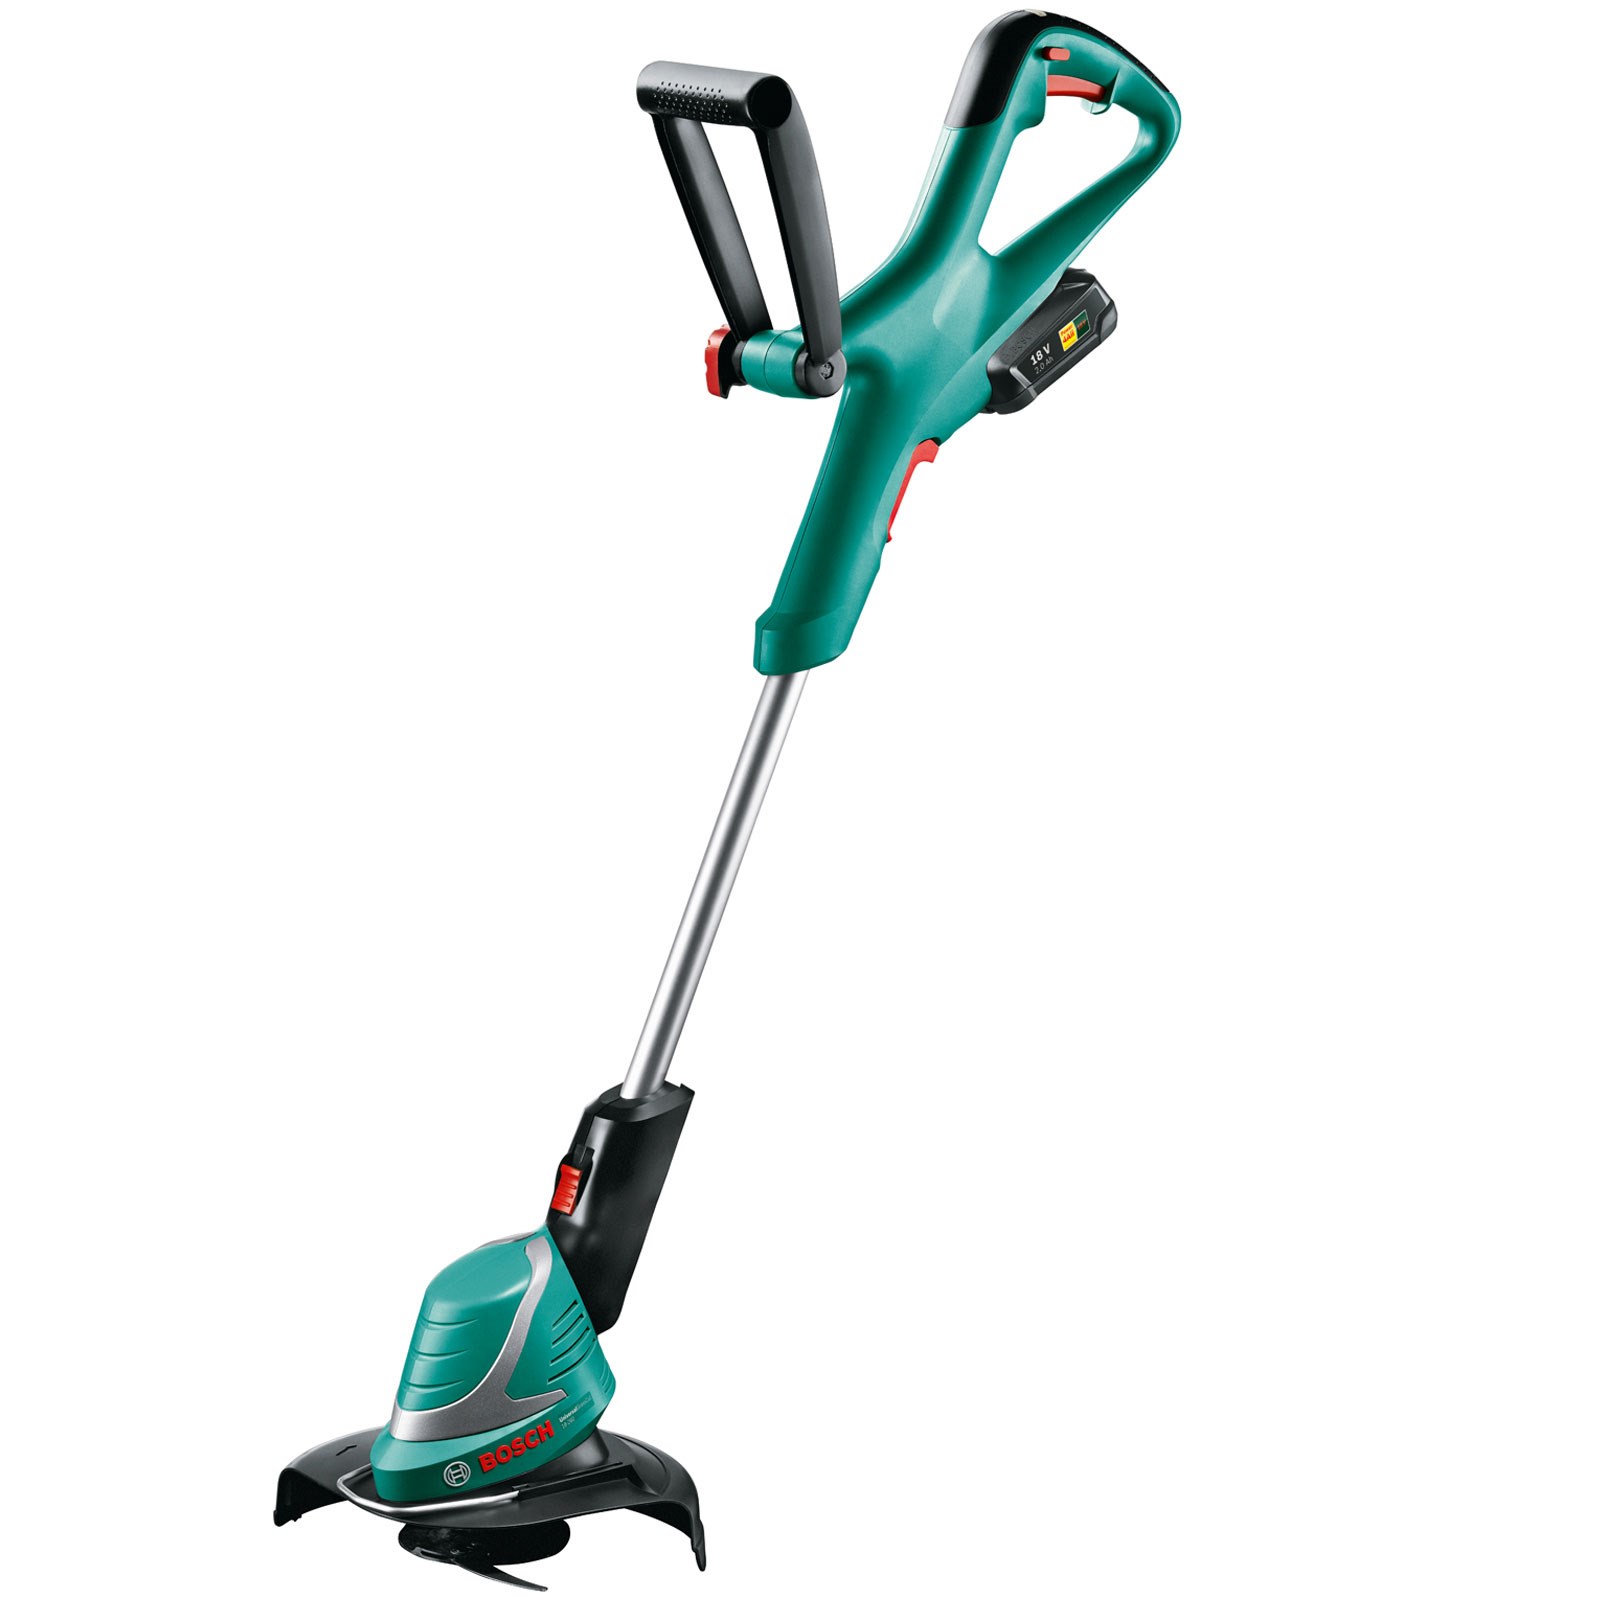 Bosch Grass Trimmers/Brushcutters Category